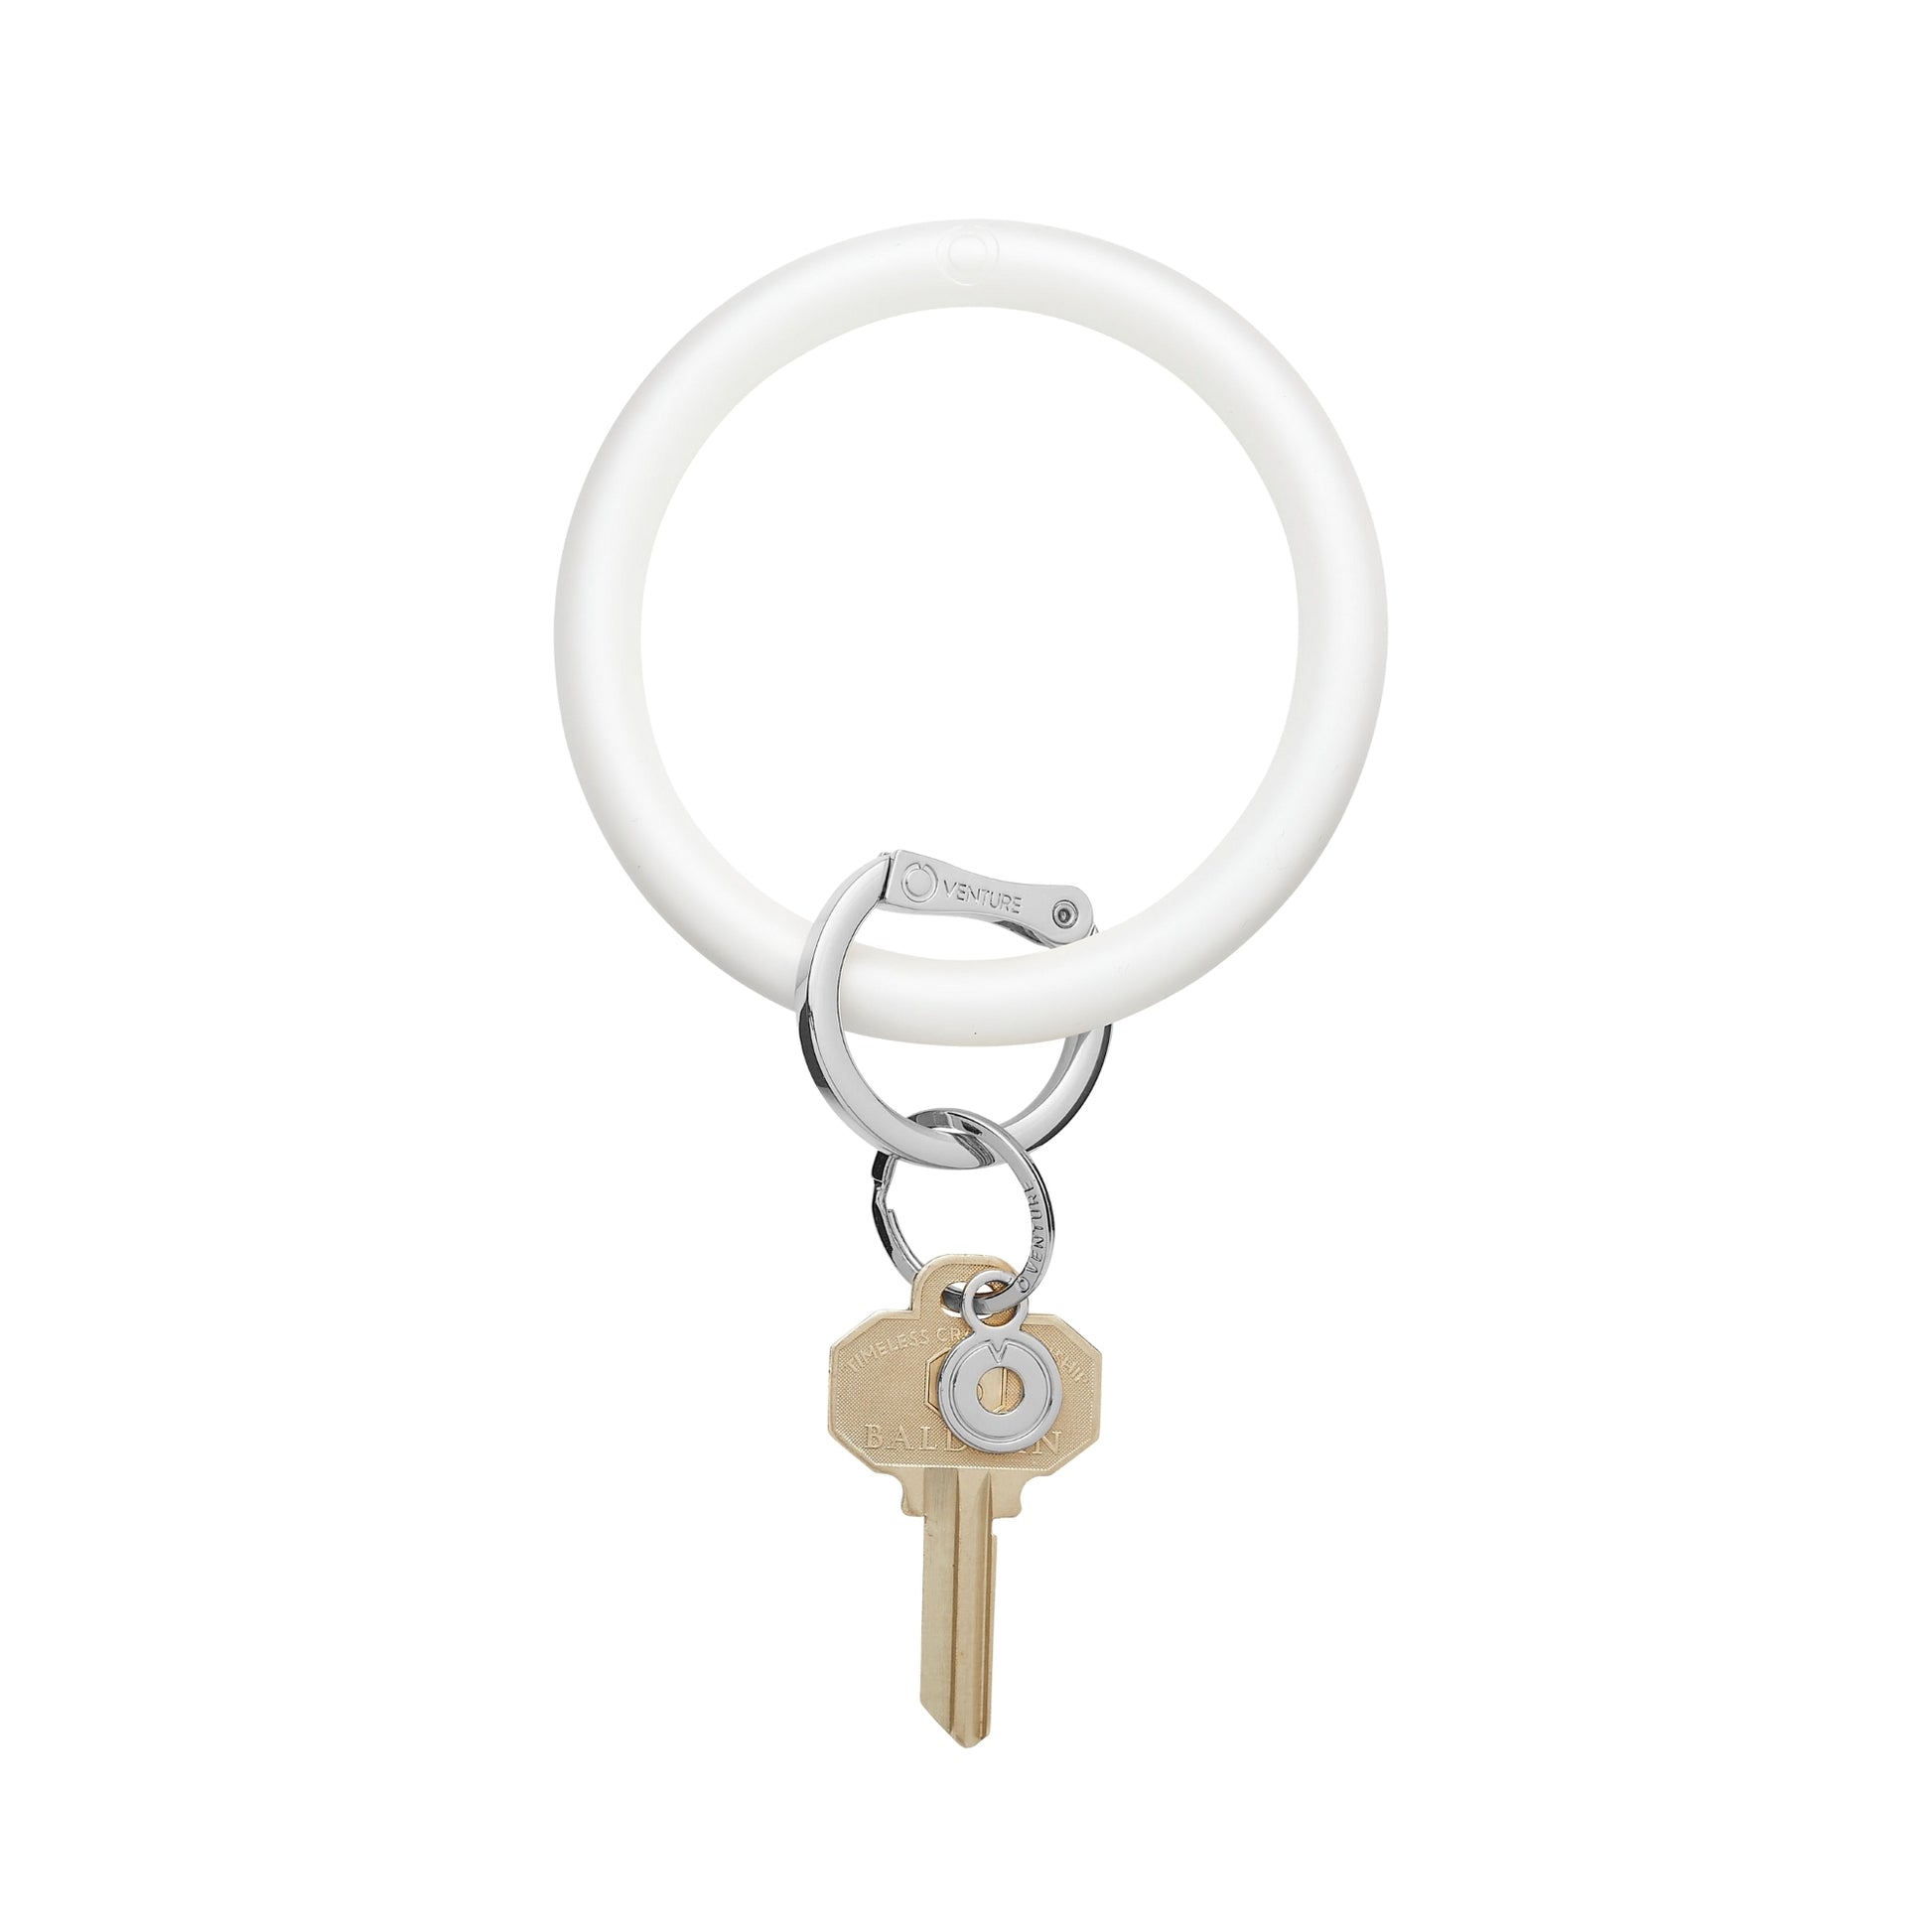 Marshmello Pearlized - Silicone Big O Key Ring with silver locking clasp and key attached